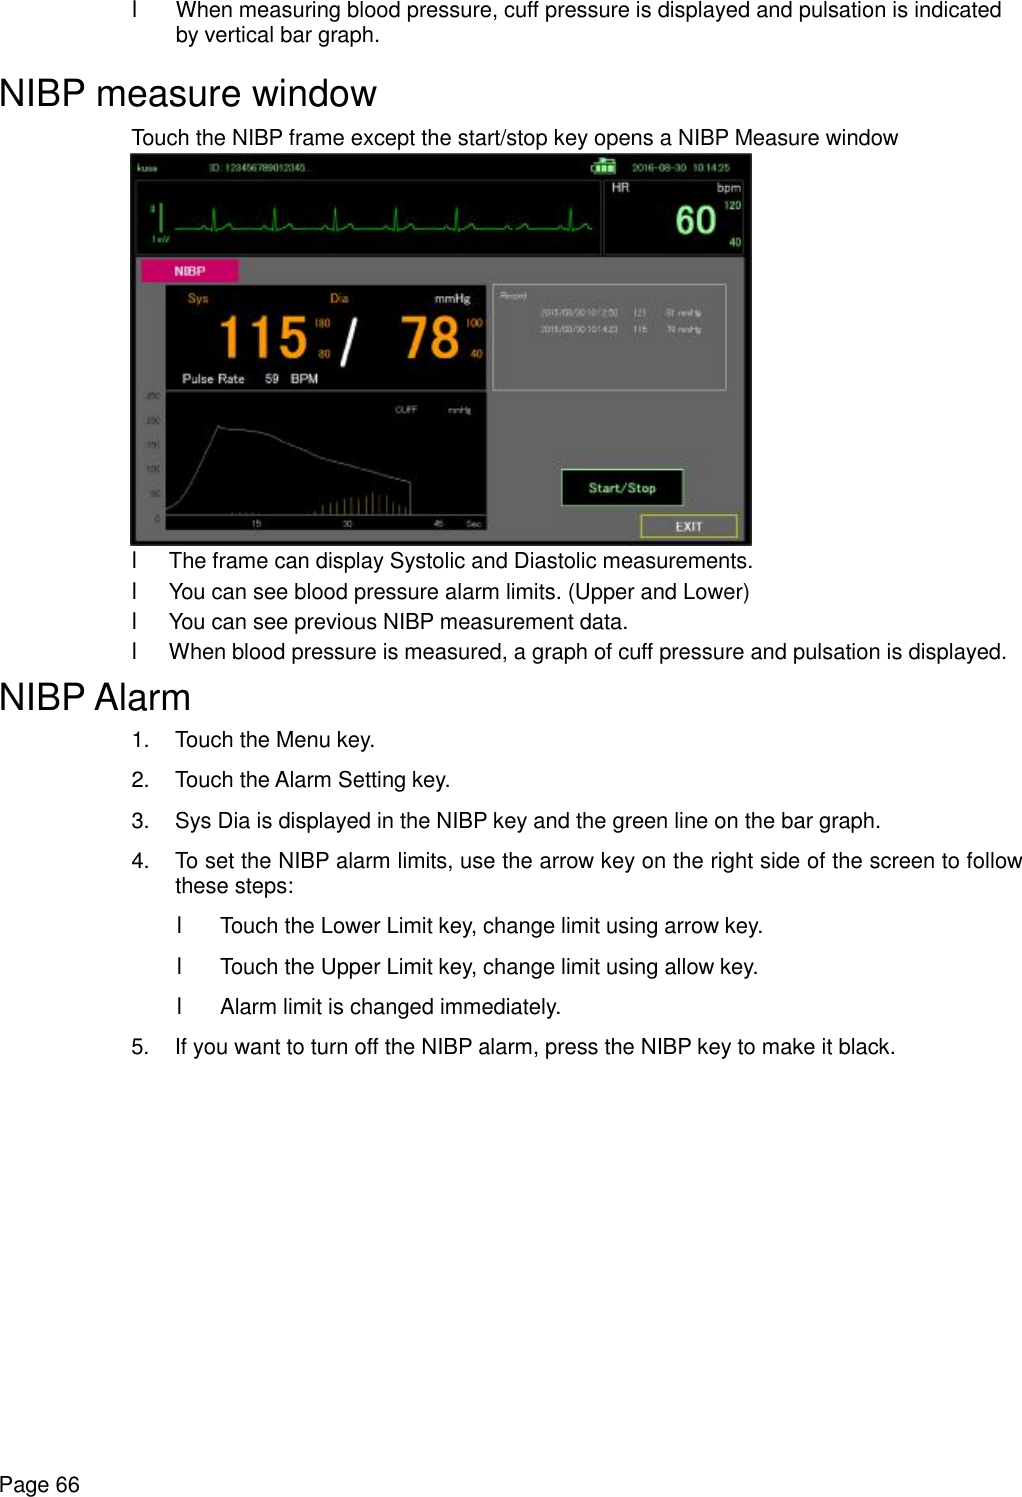    Page 66 l When measuring blood pressure, cuff pressure is displayed and pulsation is indicated by vertical bar graph. NIBP measure window Touch the NIBP frame except the start/stop key opens a NIBP Measure window  l The frame can display Systolic and Diastolic measurements. l You can see blood pressure alarm limits. (Upper and Lower) l You can see previous NIBP measurement data. l When blood pressure is measured, a graph of cuff pressure and pulsation is displayed. NIBP Alarm 1. Touch the Menu key. 2. Touch the Alarm Setting key. 3. Sys Dia is displayed in the NIBP key and the green line on the bar graph. 4. To set the NIBP alarm limits, use the arrow key on the right side of the screen to follow these steps: l Touch the Lower Limit key, change limit using arrow key. l Touch the Upper Limit key, change limit using allow key. l Alarm limit is changed immediately. 5. If you want to turn off the NIBP alarm, press the NIBP key to make it black. 